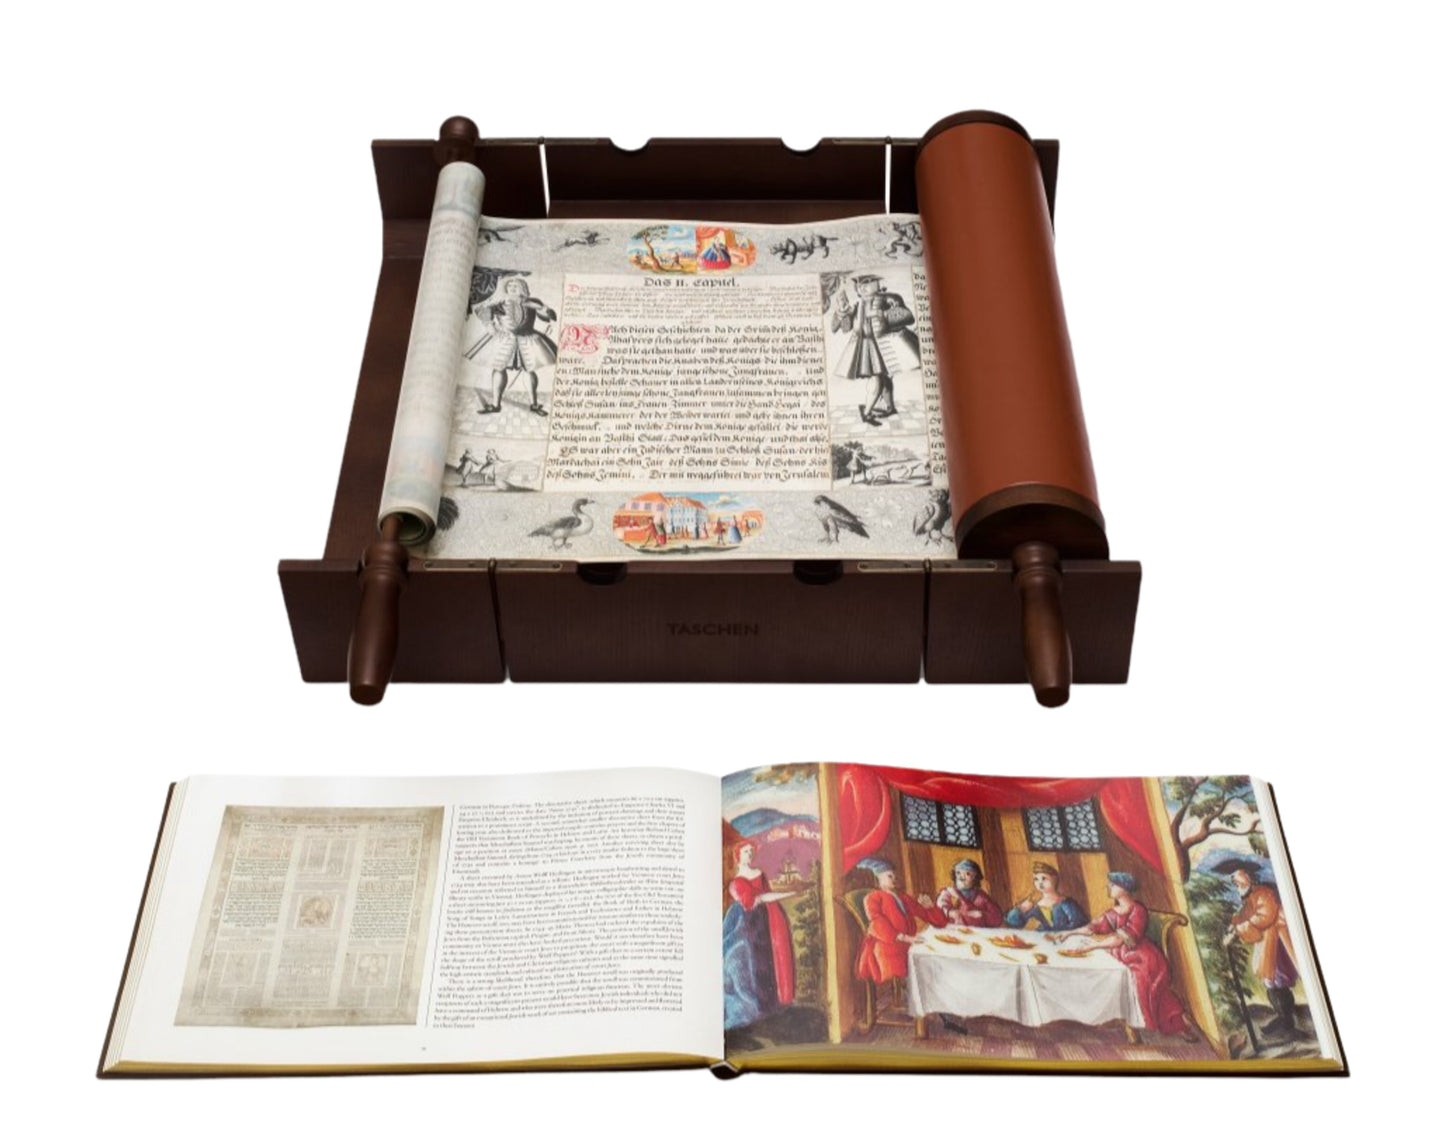 Taschen Books - The Esther Scroll Manuscript In Wooden Display